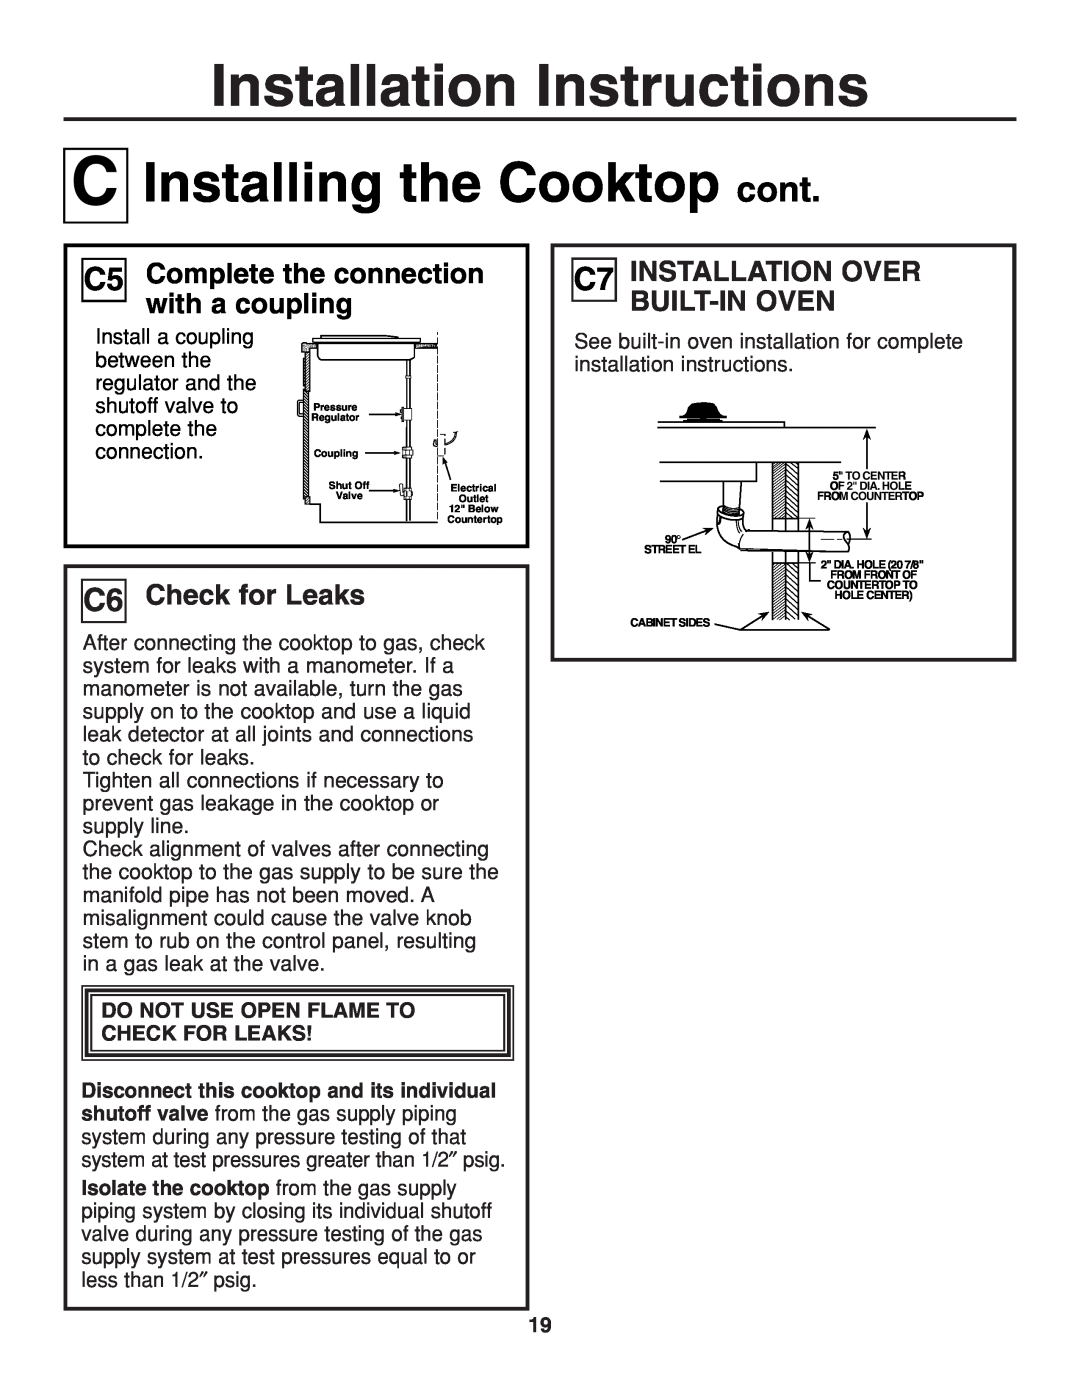 GE JGP321 Installing the Cooktop cont, C5 Complete the connection with a coupling, C7 INSTALLATION OVER BUILT-INOVEN 